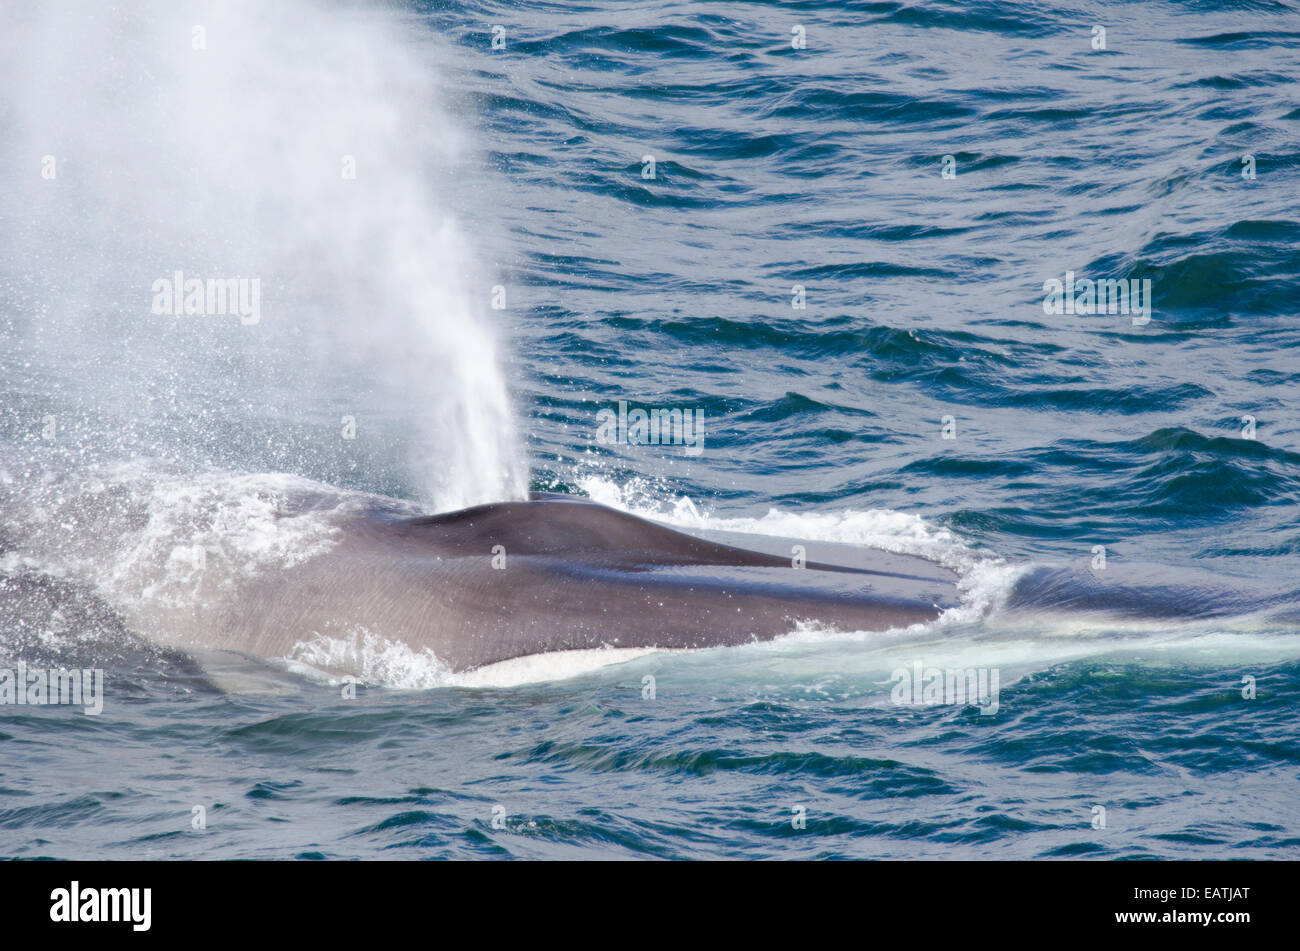 Spout of an endangered fin whale, Balaenoptera physalus feeding. Stock Photo